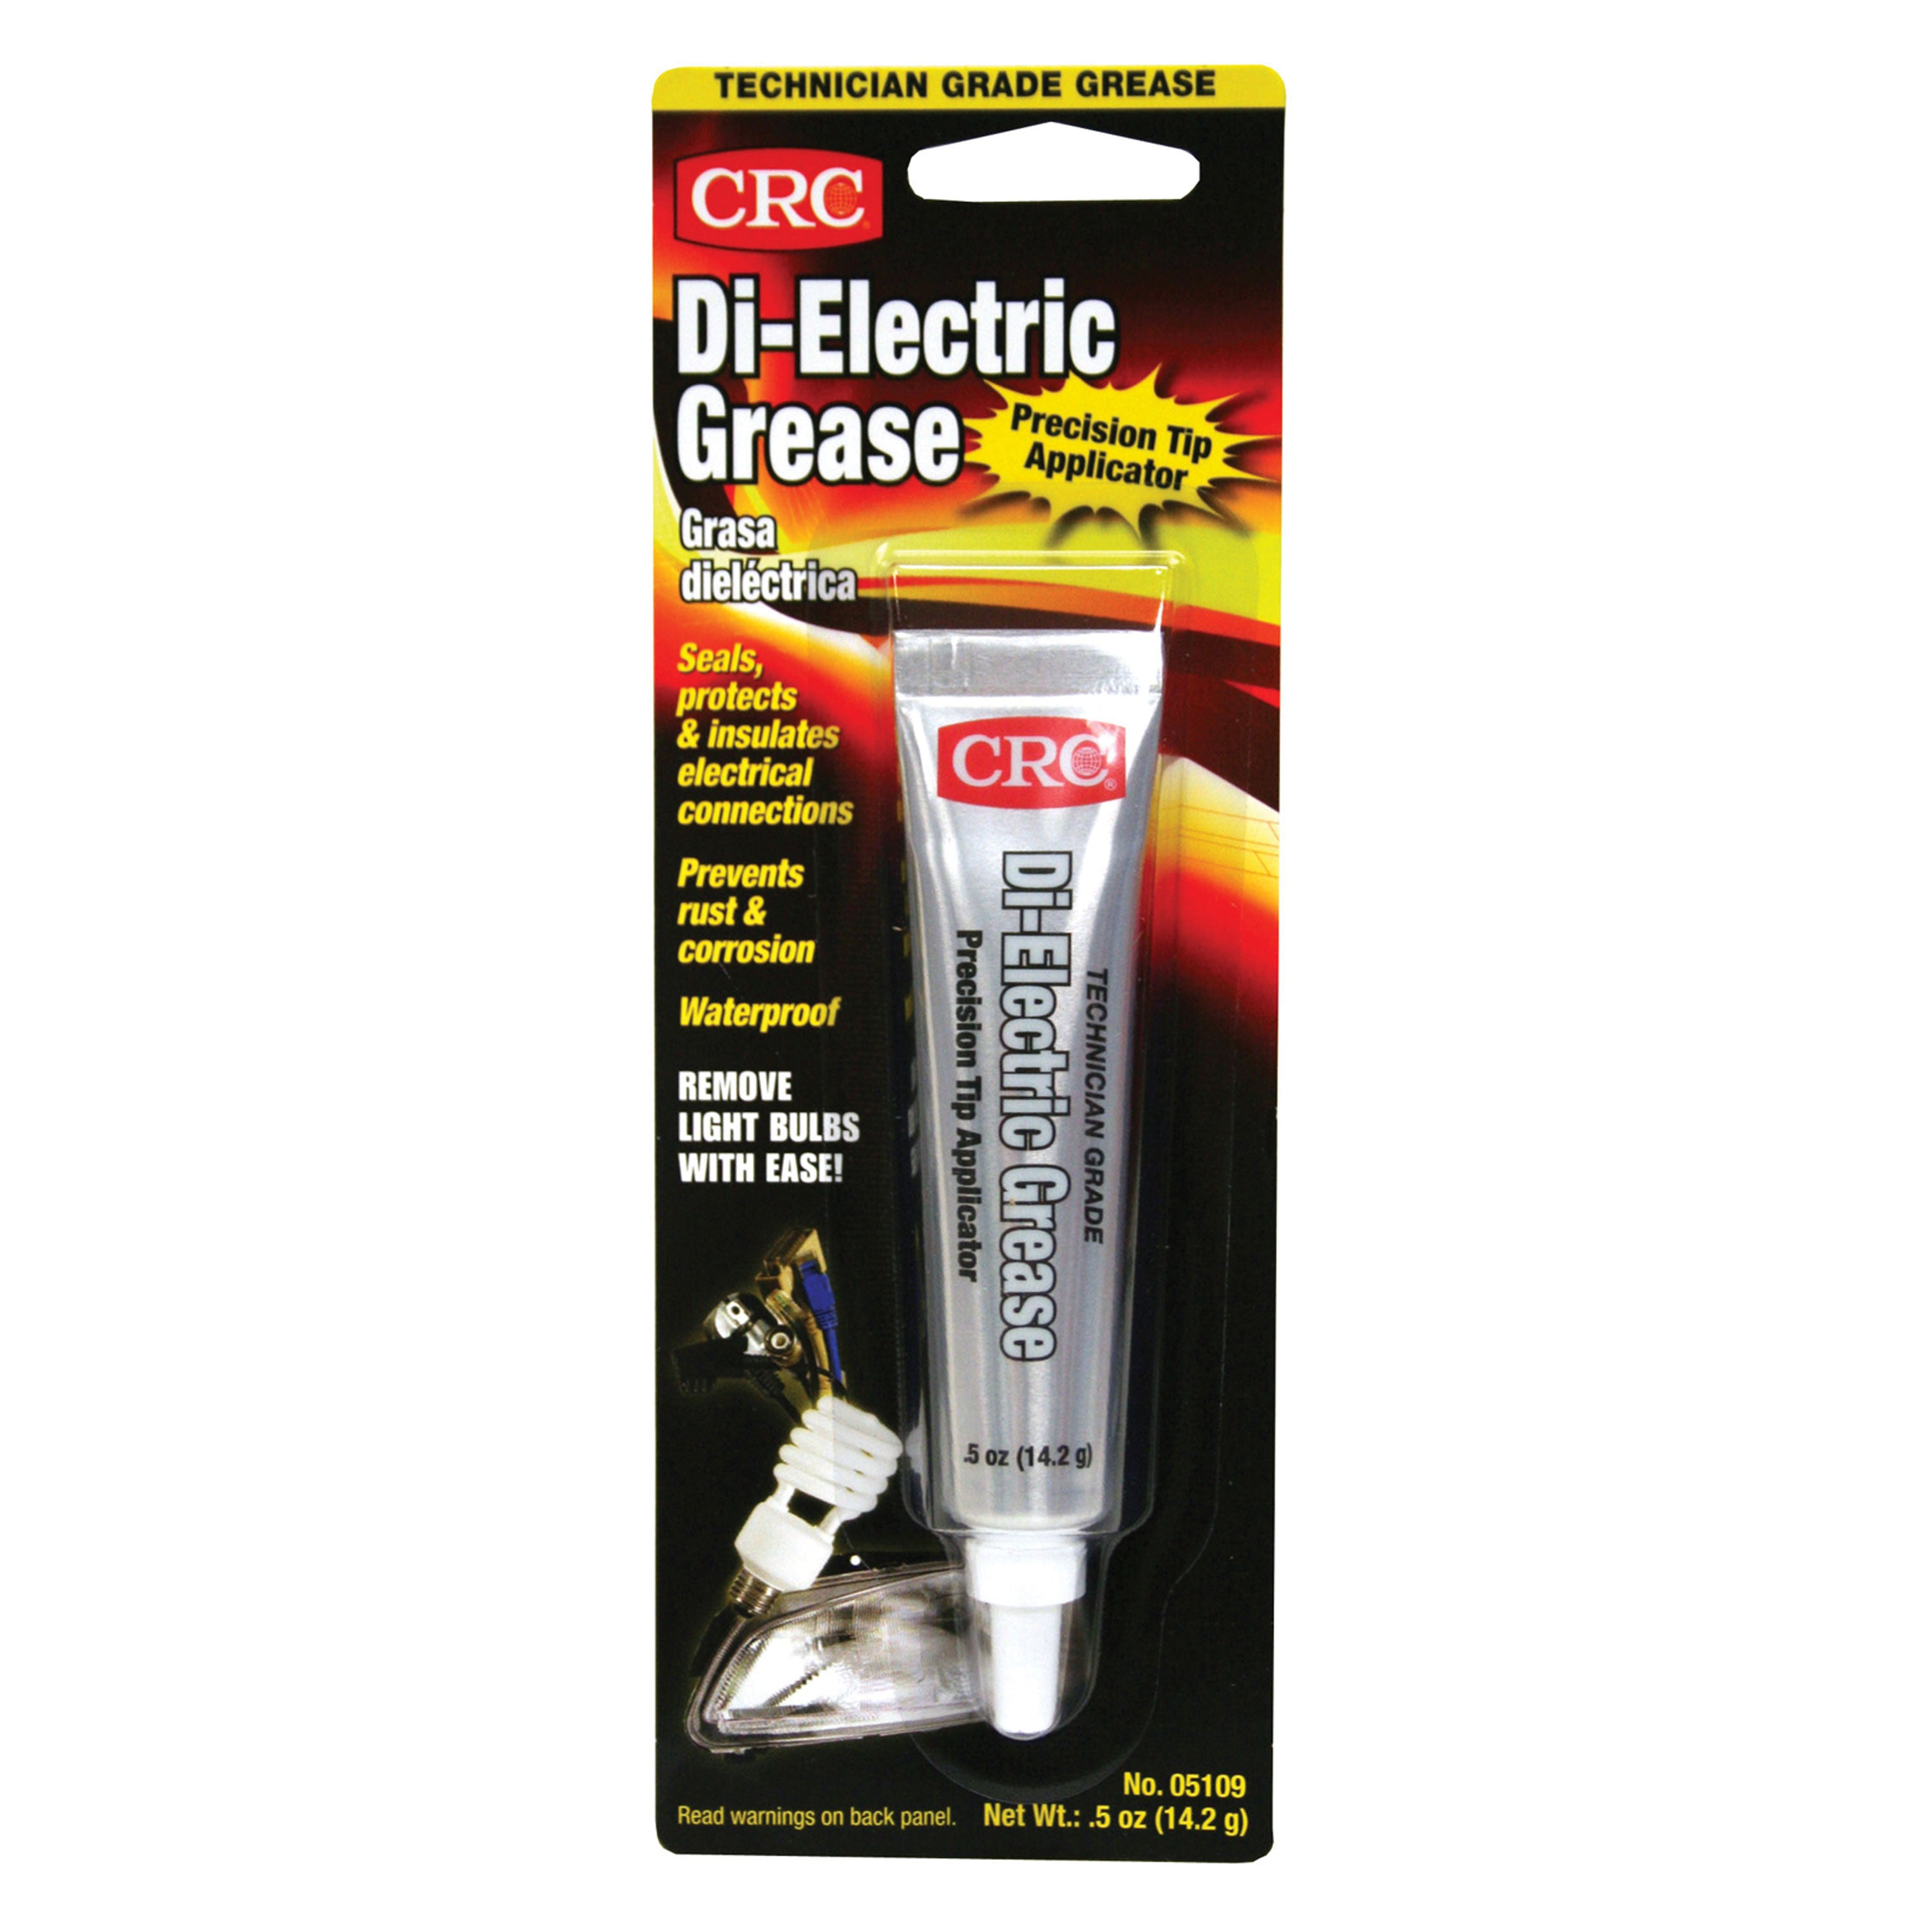 CRC 05109 Dielectric Grease with Precision Tip Applicator - 0.5 oz. Tube